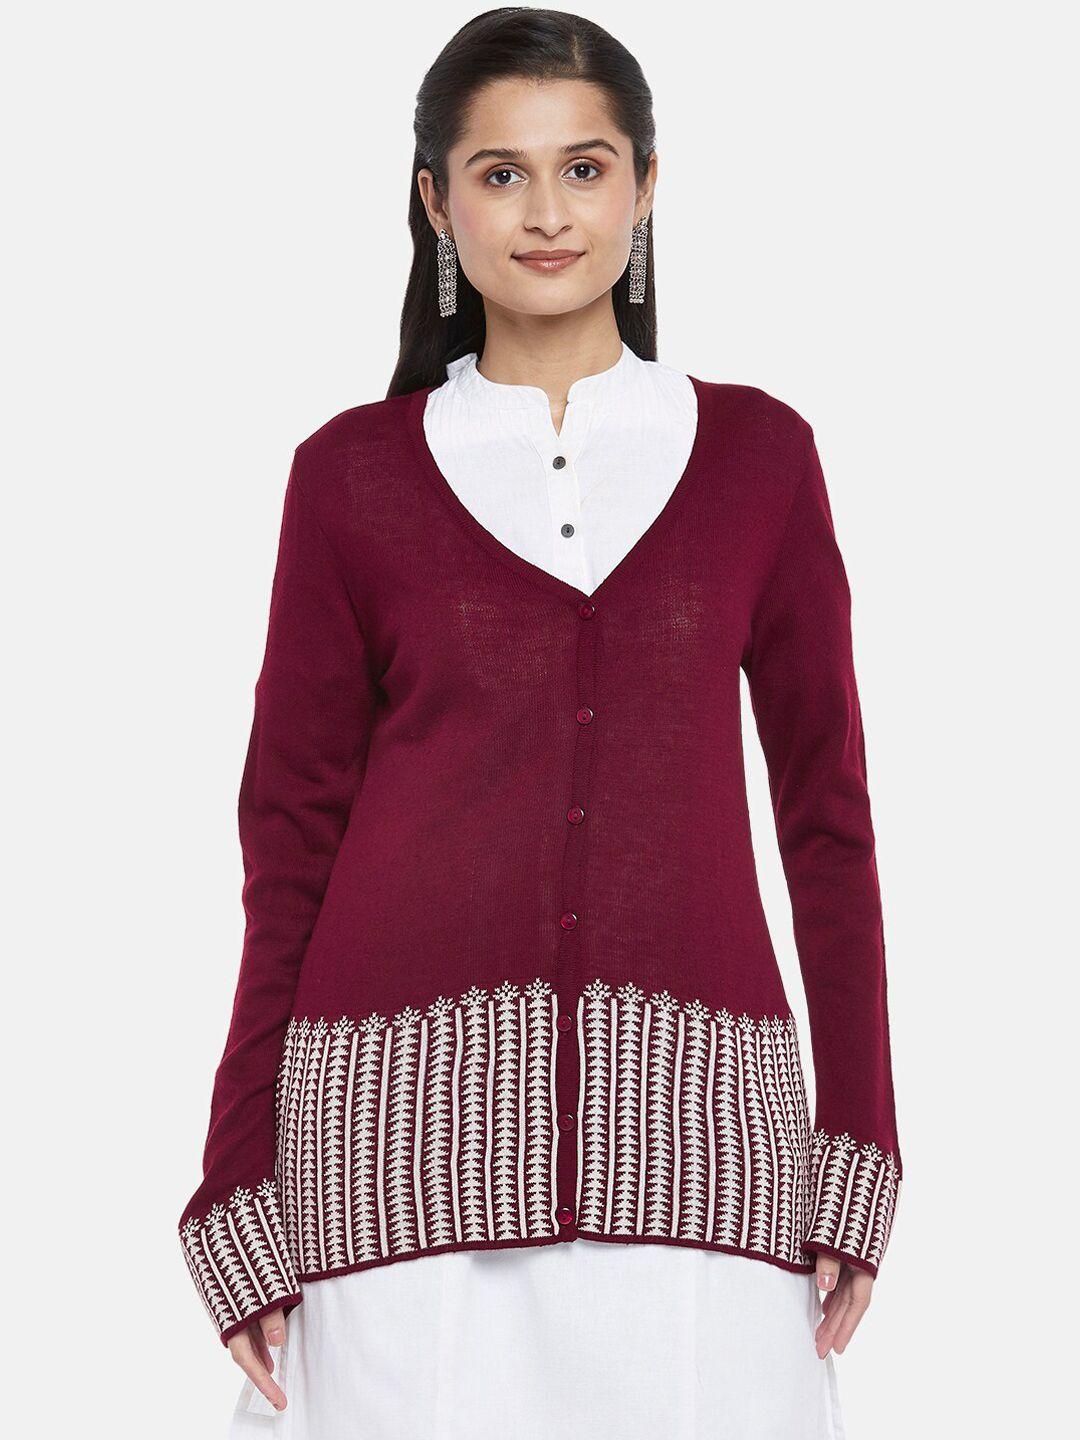 rangmanch by pantaloons women maroon & white solid overcoat